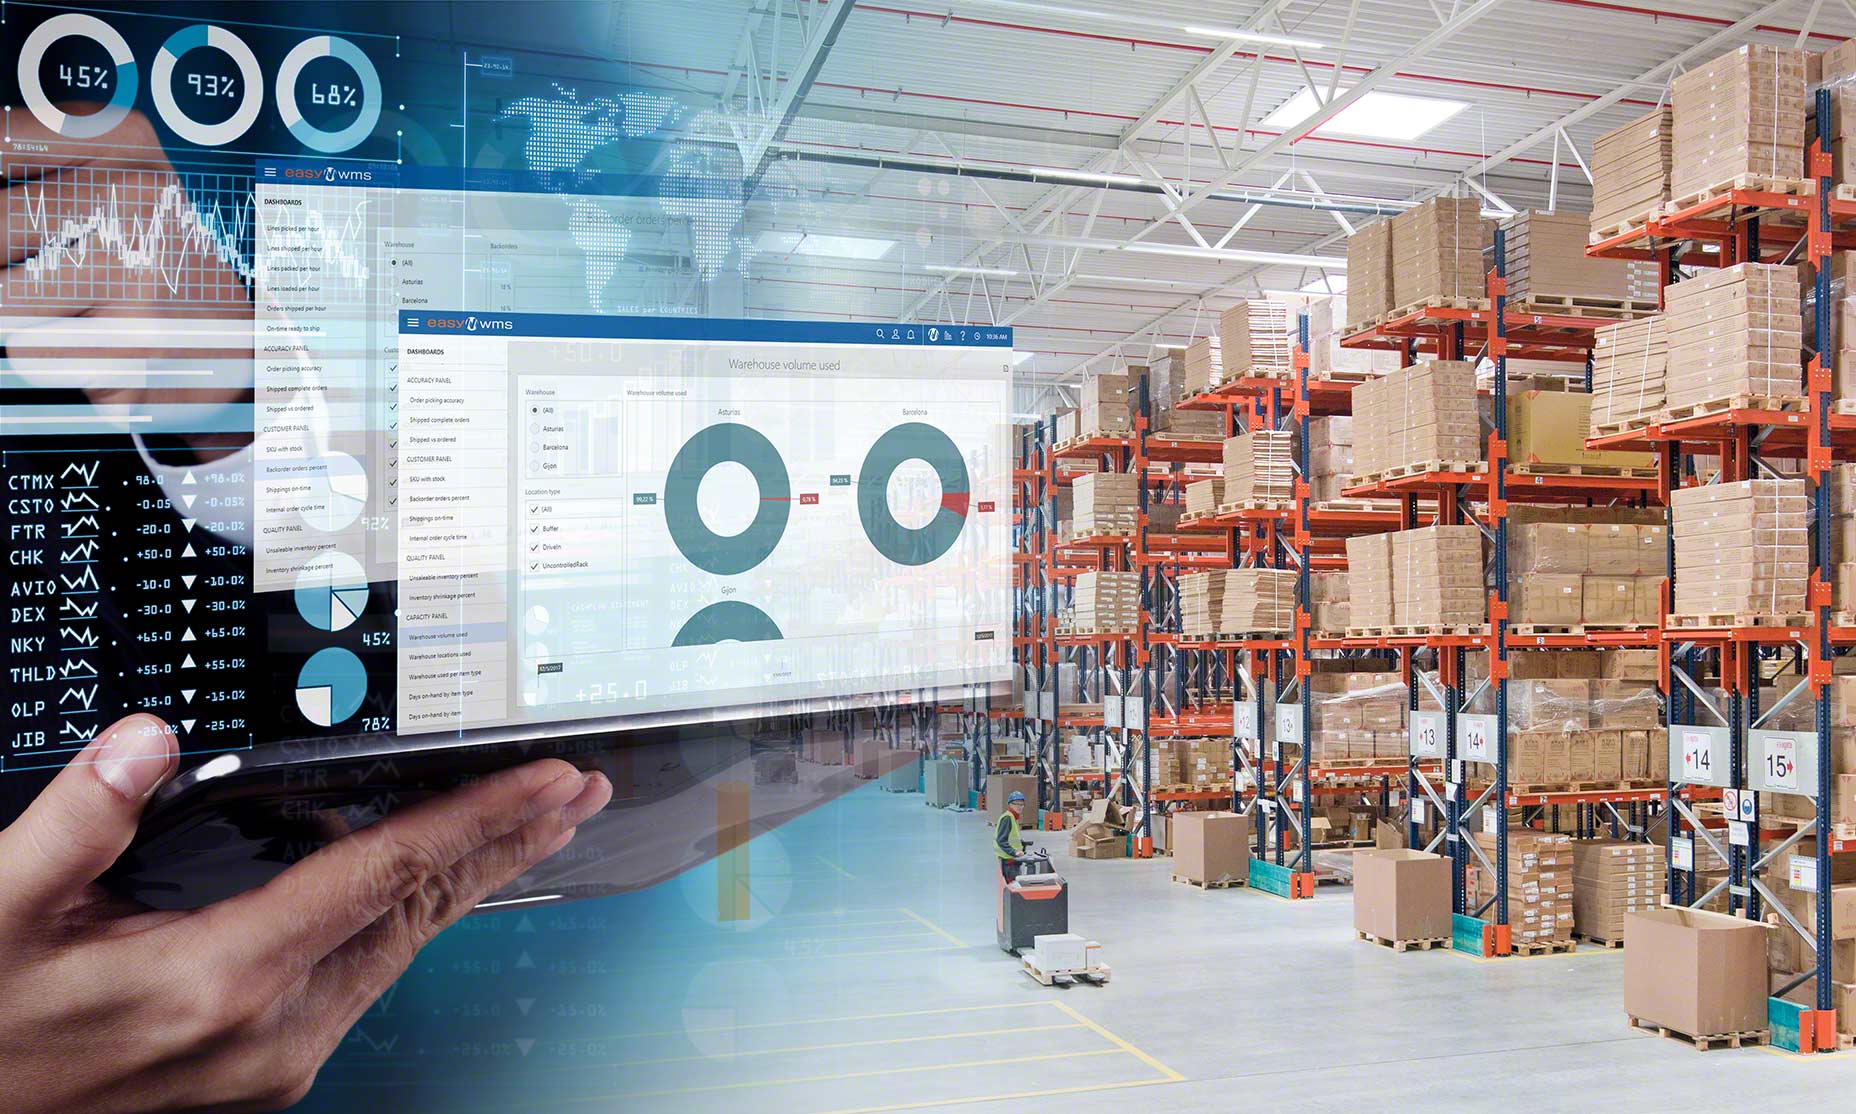 3PL warehouse software: what is it and how does it work?